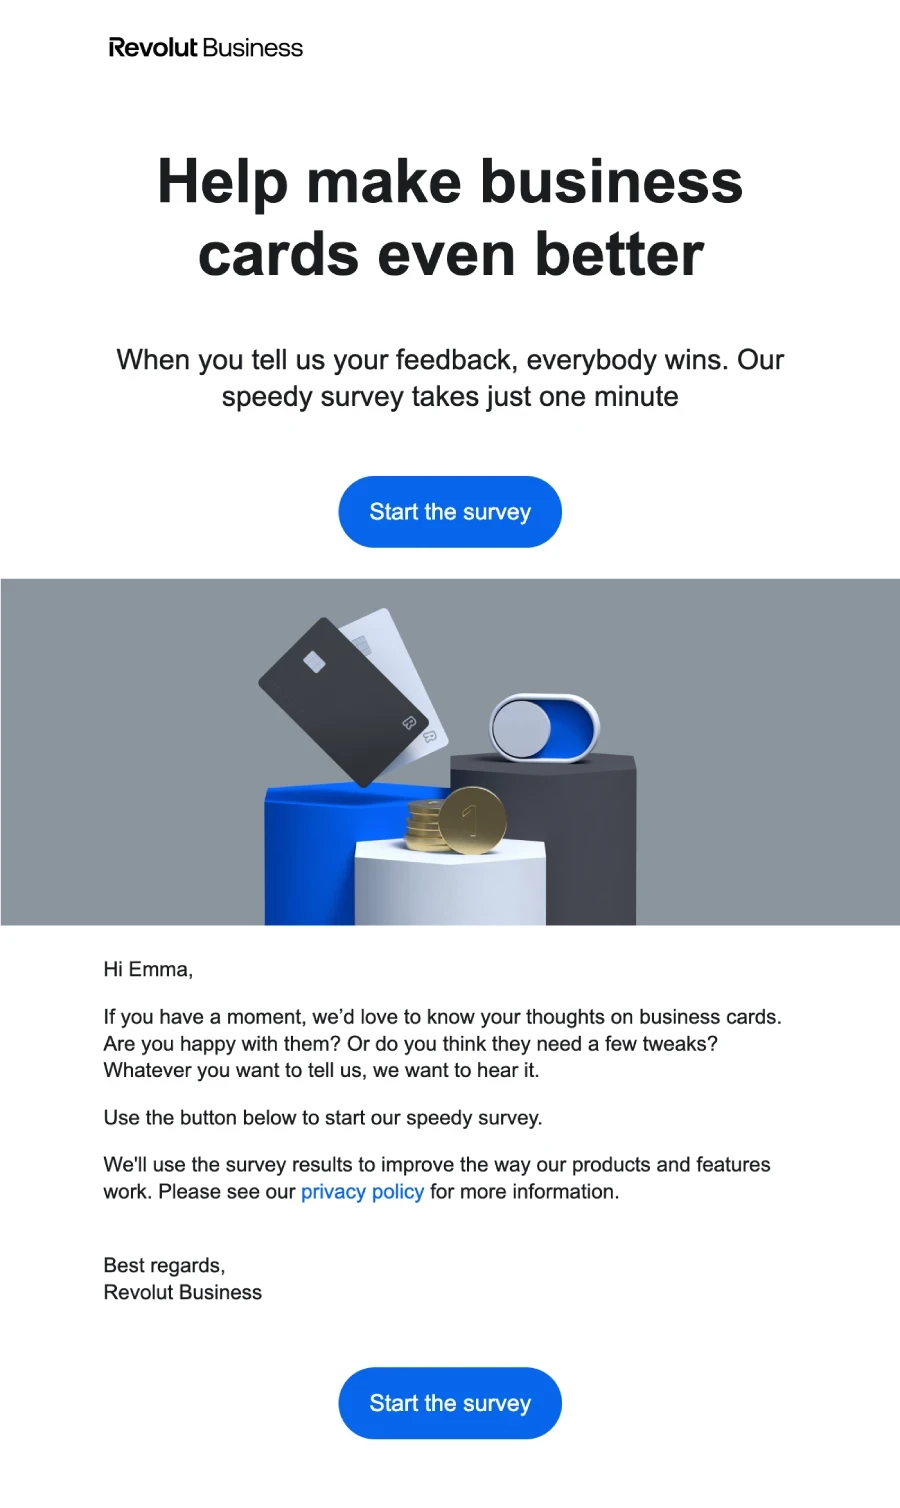 Email survey example from Revolut